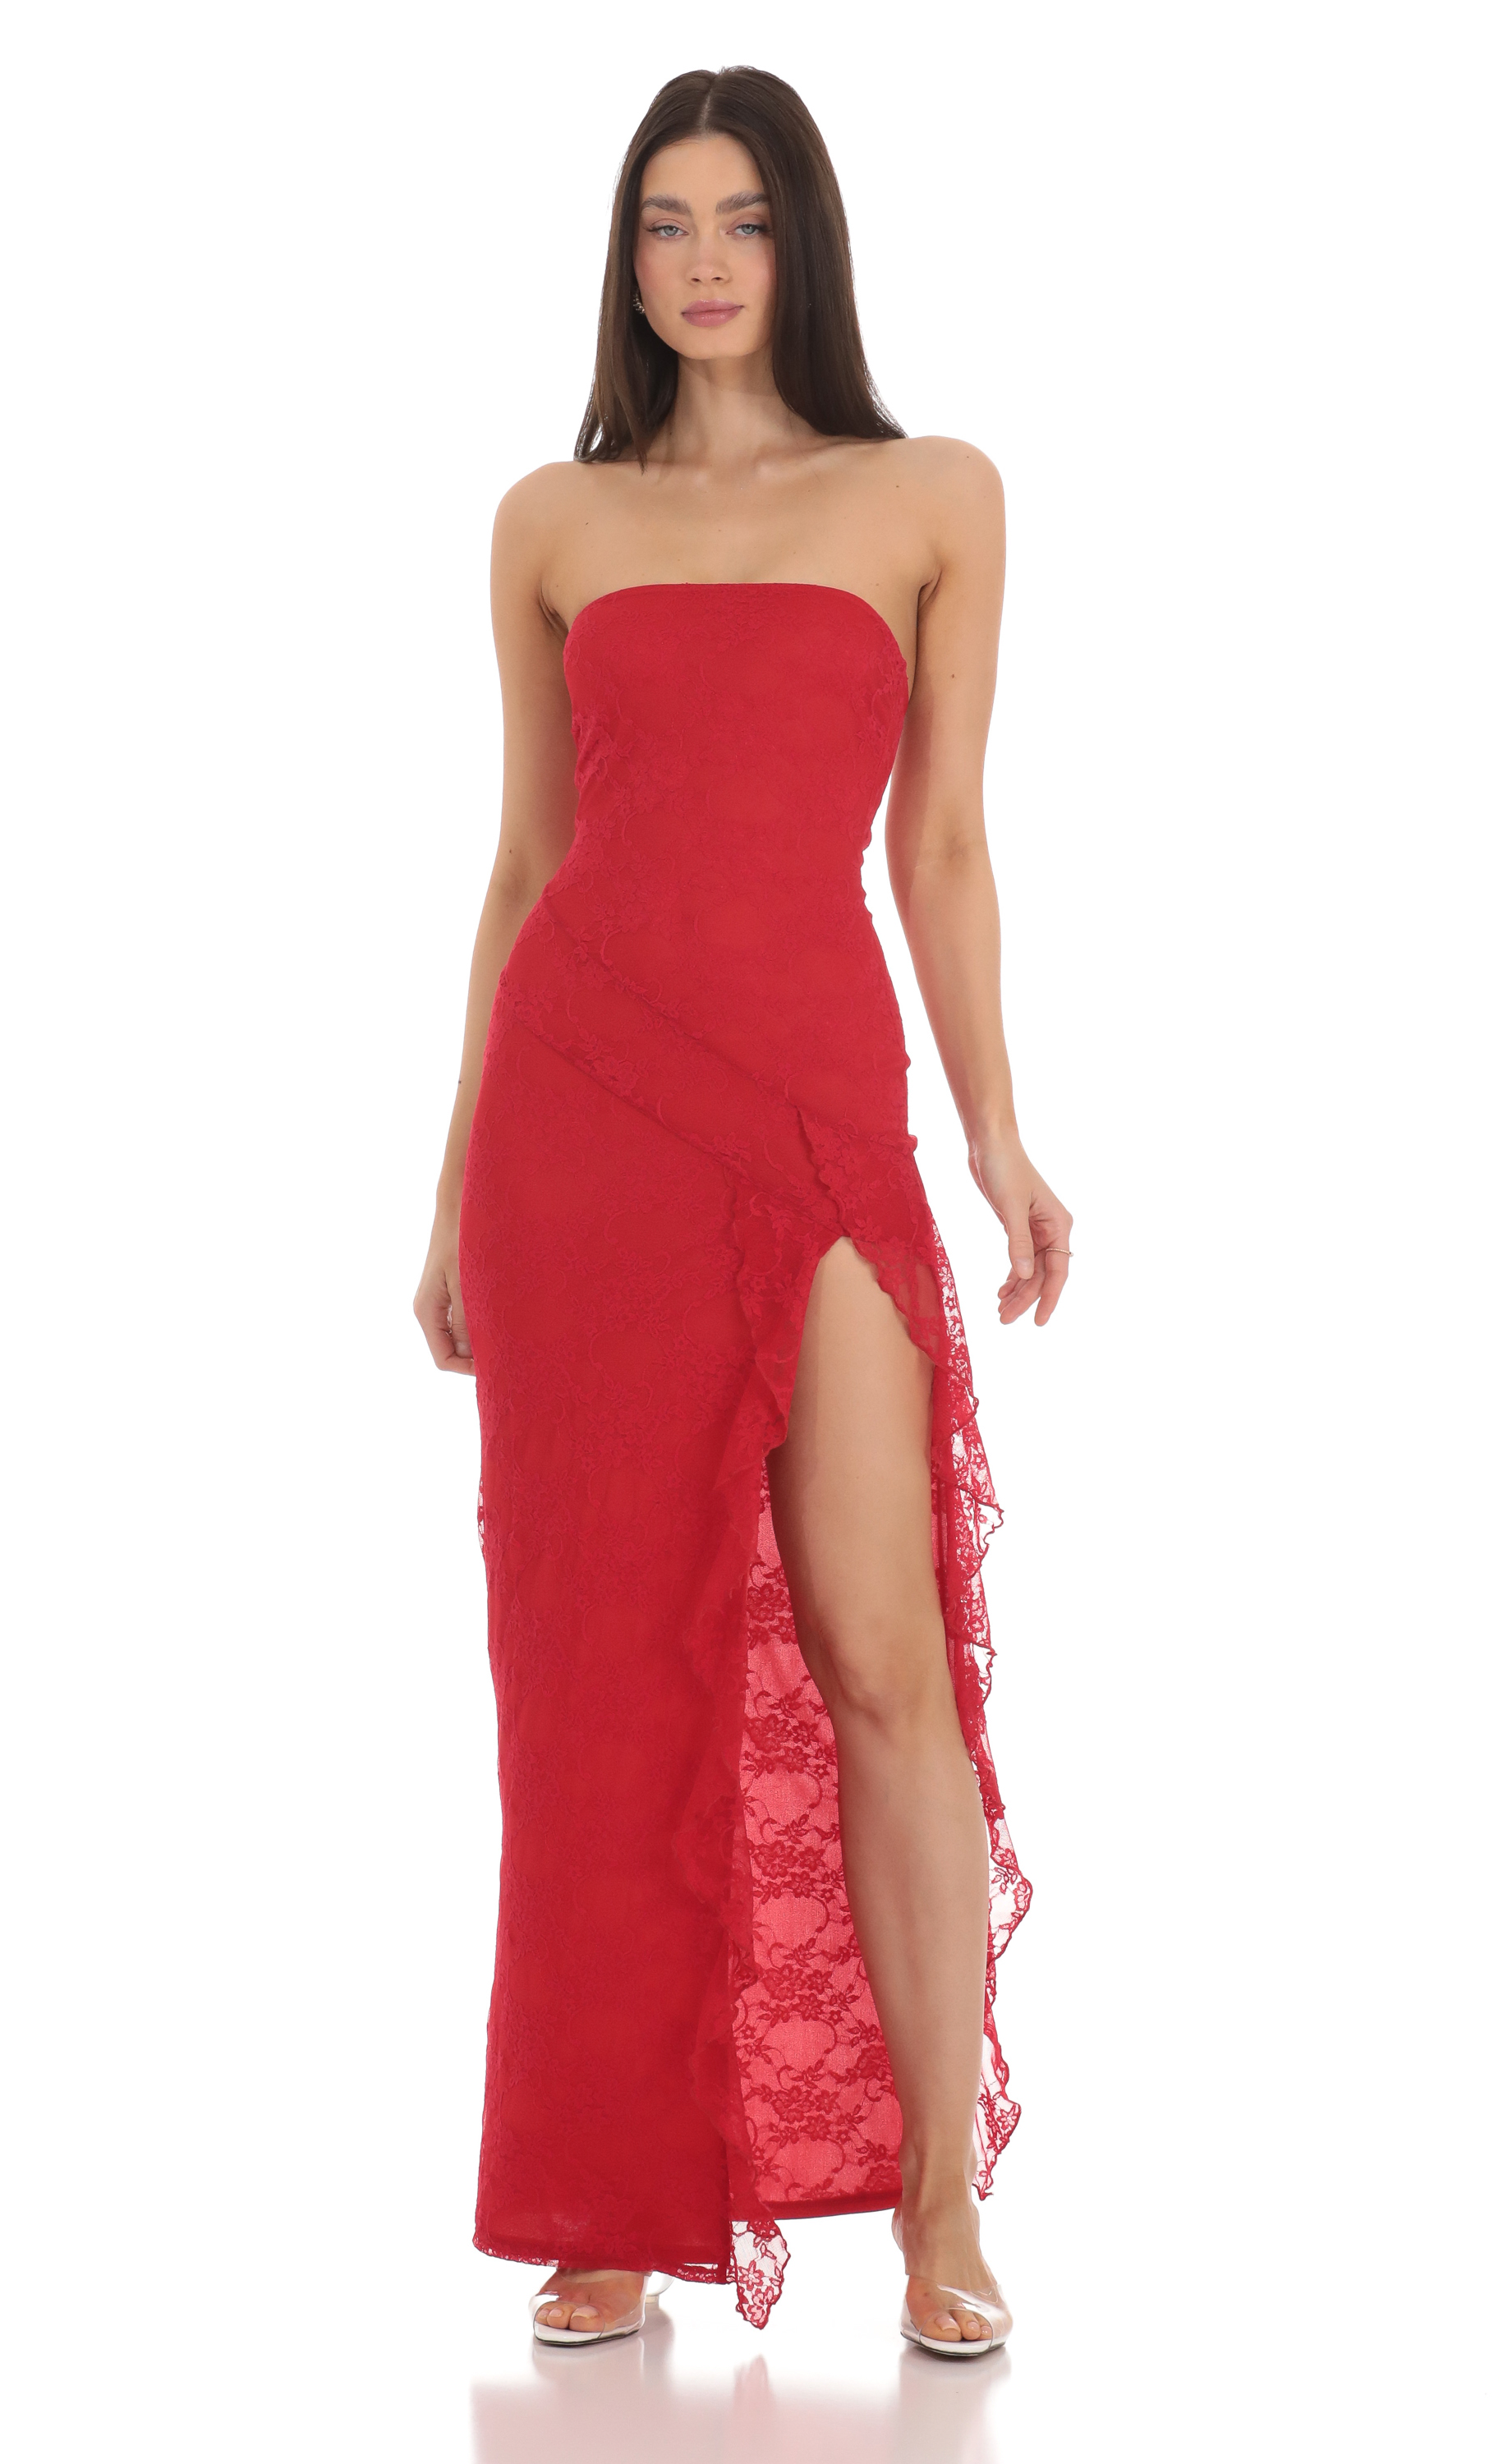 Strapless Lace Ruffle Slit Dress in Red